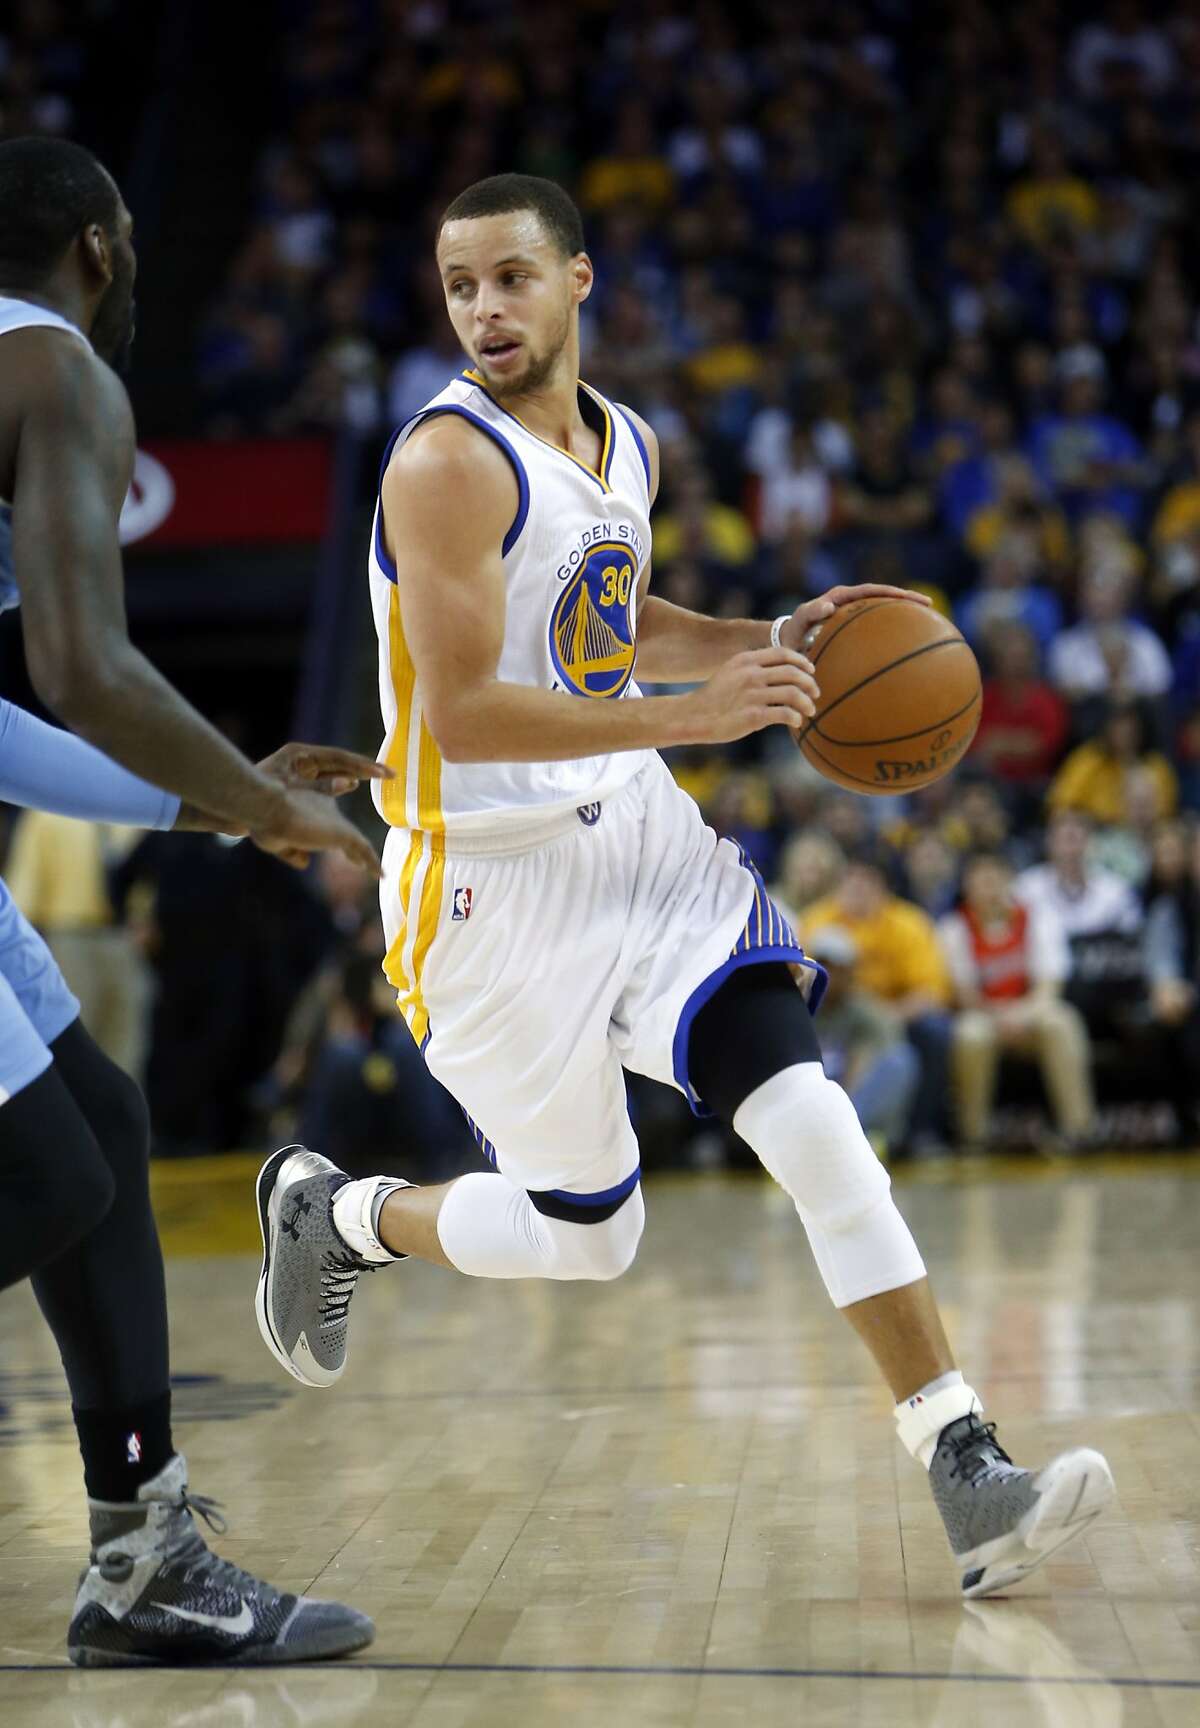 Golden State Warriors' Stephen Curry dribbles against Denver Nuggets during NBA game at Oracle Arena in Oakland, Calif. on Monday, January 19, 2015.